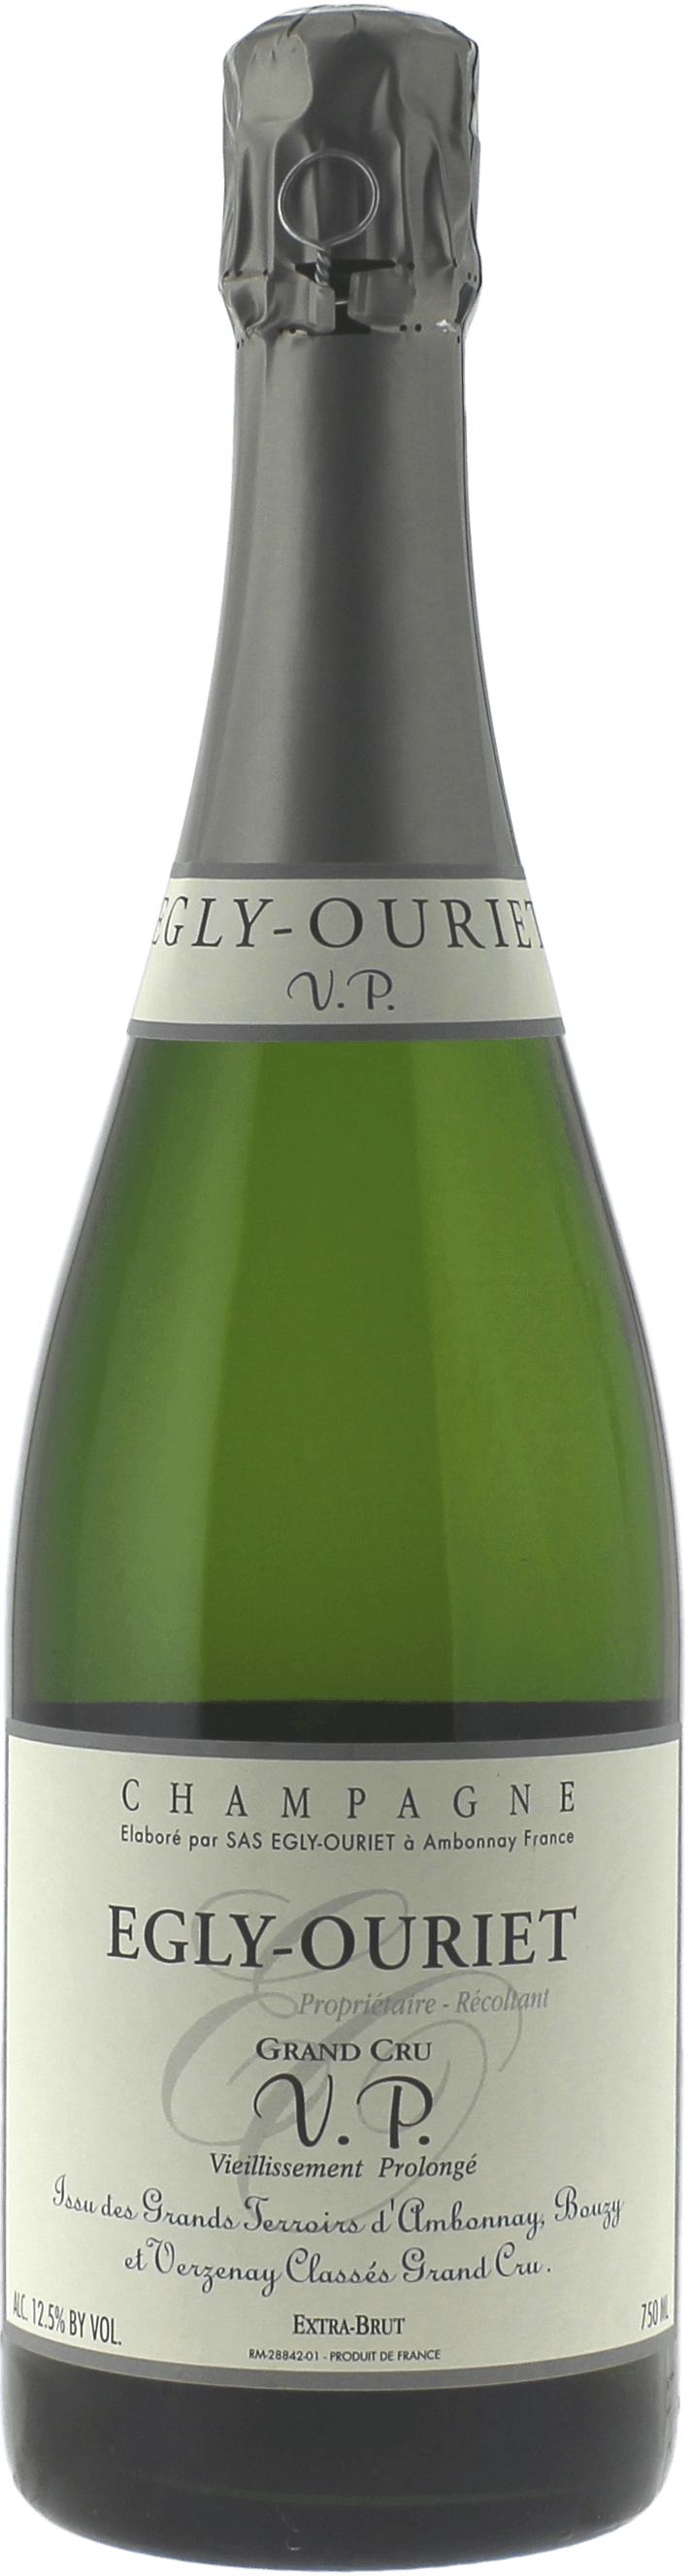 Egly ouriet prestige 2008  EGLY OURIET, Champagne